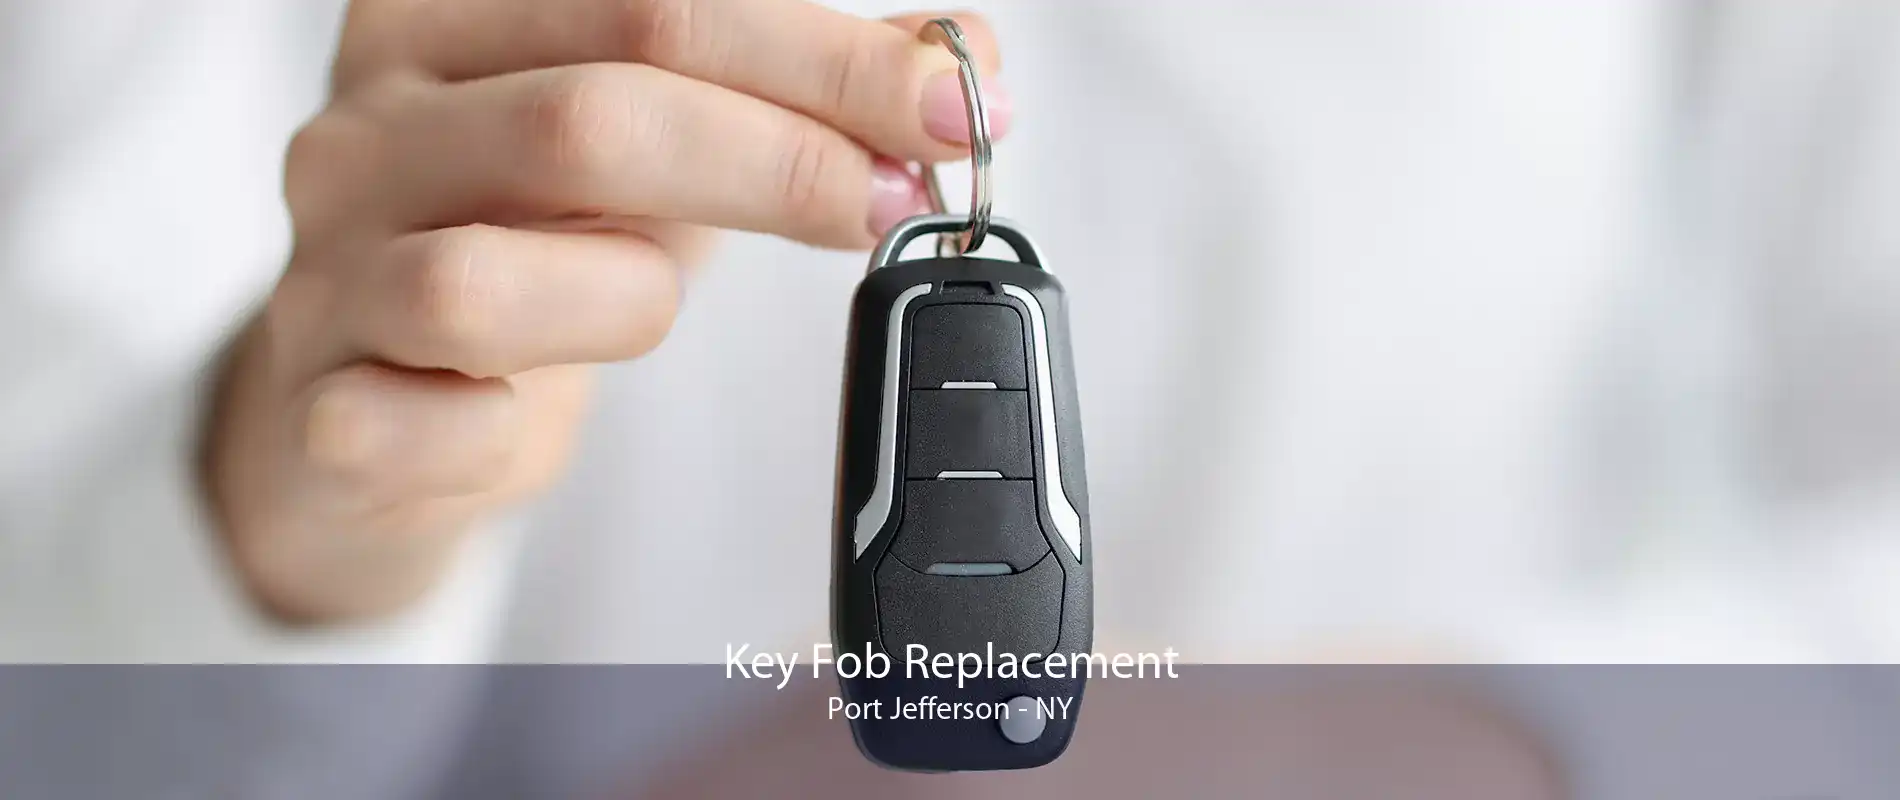 Key Fob Replacement Port Jefferson - NY